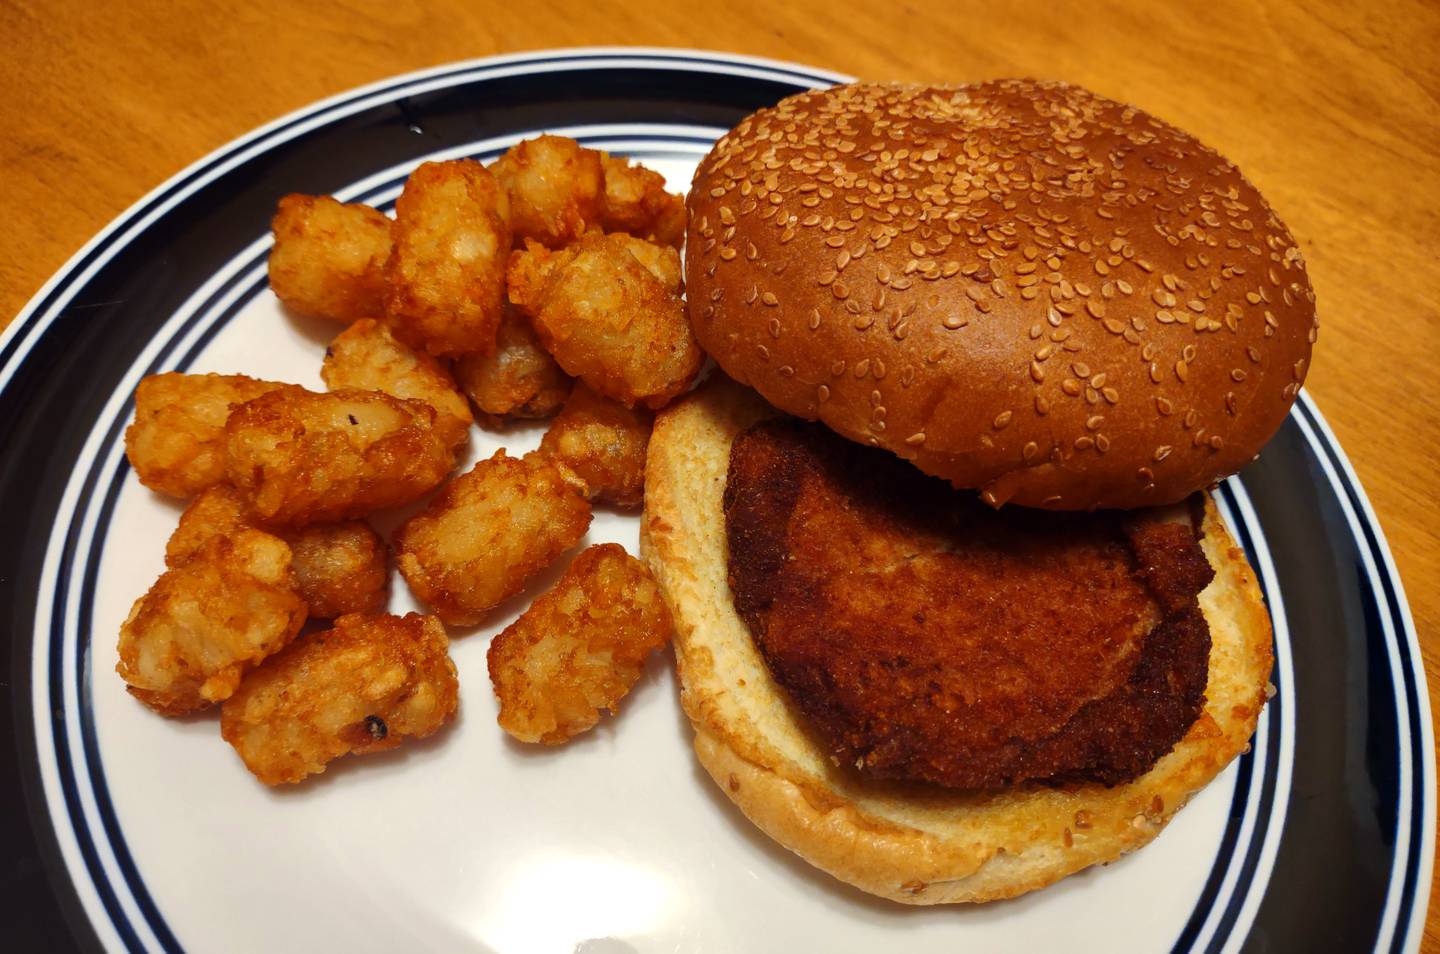 One of the sandwiches on the Ziggy's Bar & Grill menu is the breaded pork chop, which is served with a side of fries or tater tots.